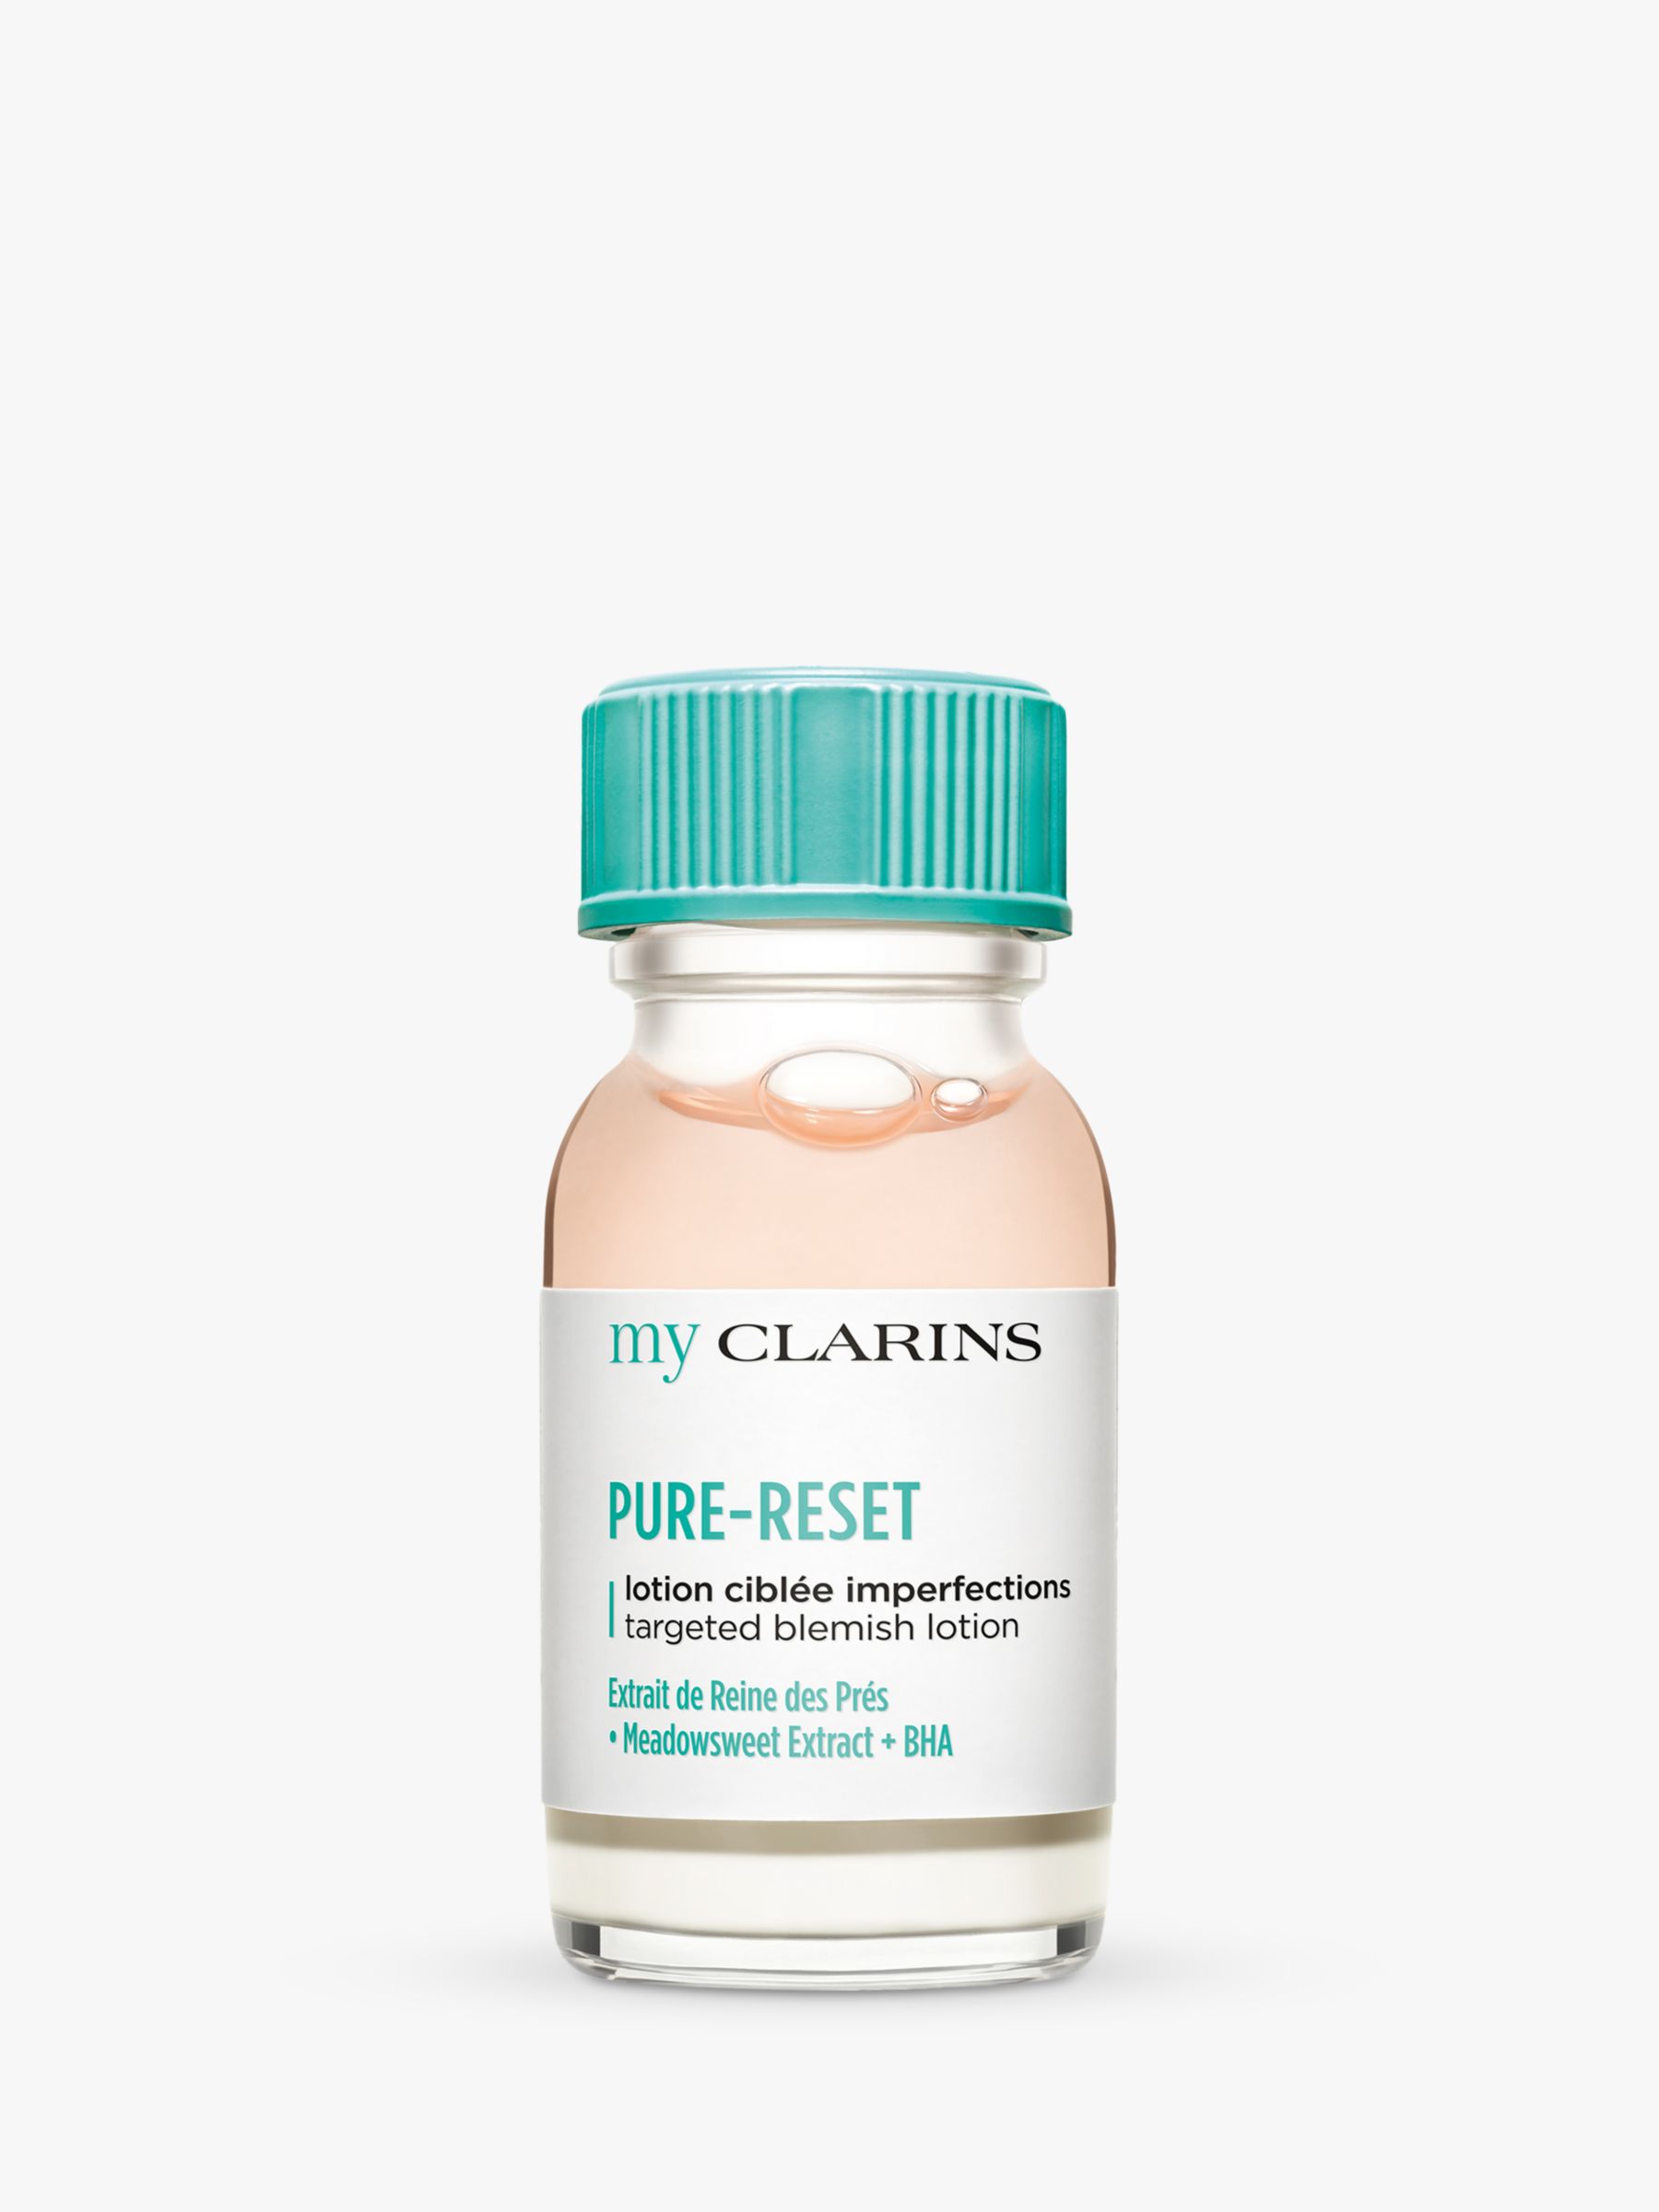 Clarins My Clarins PURE-RESET Targeted Blemish Lotion, 13ml 1